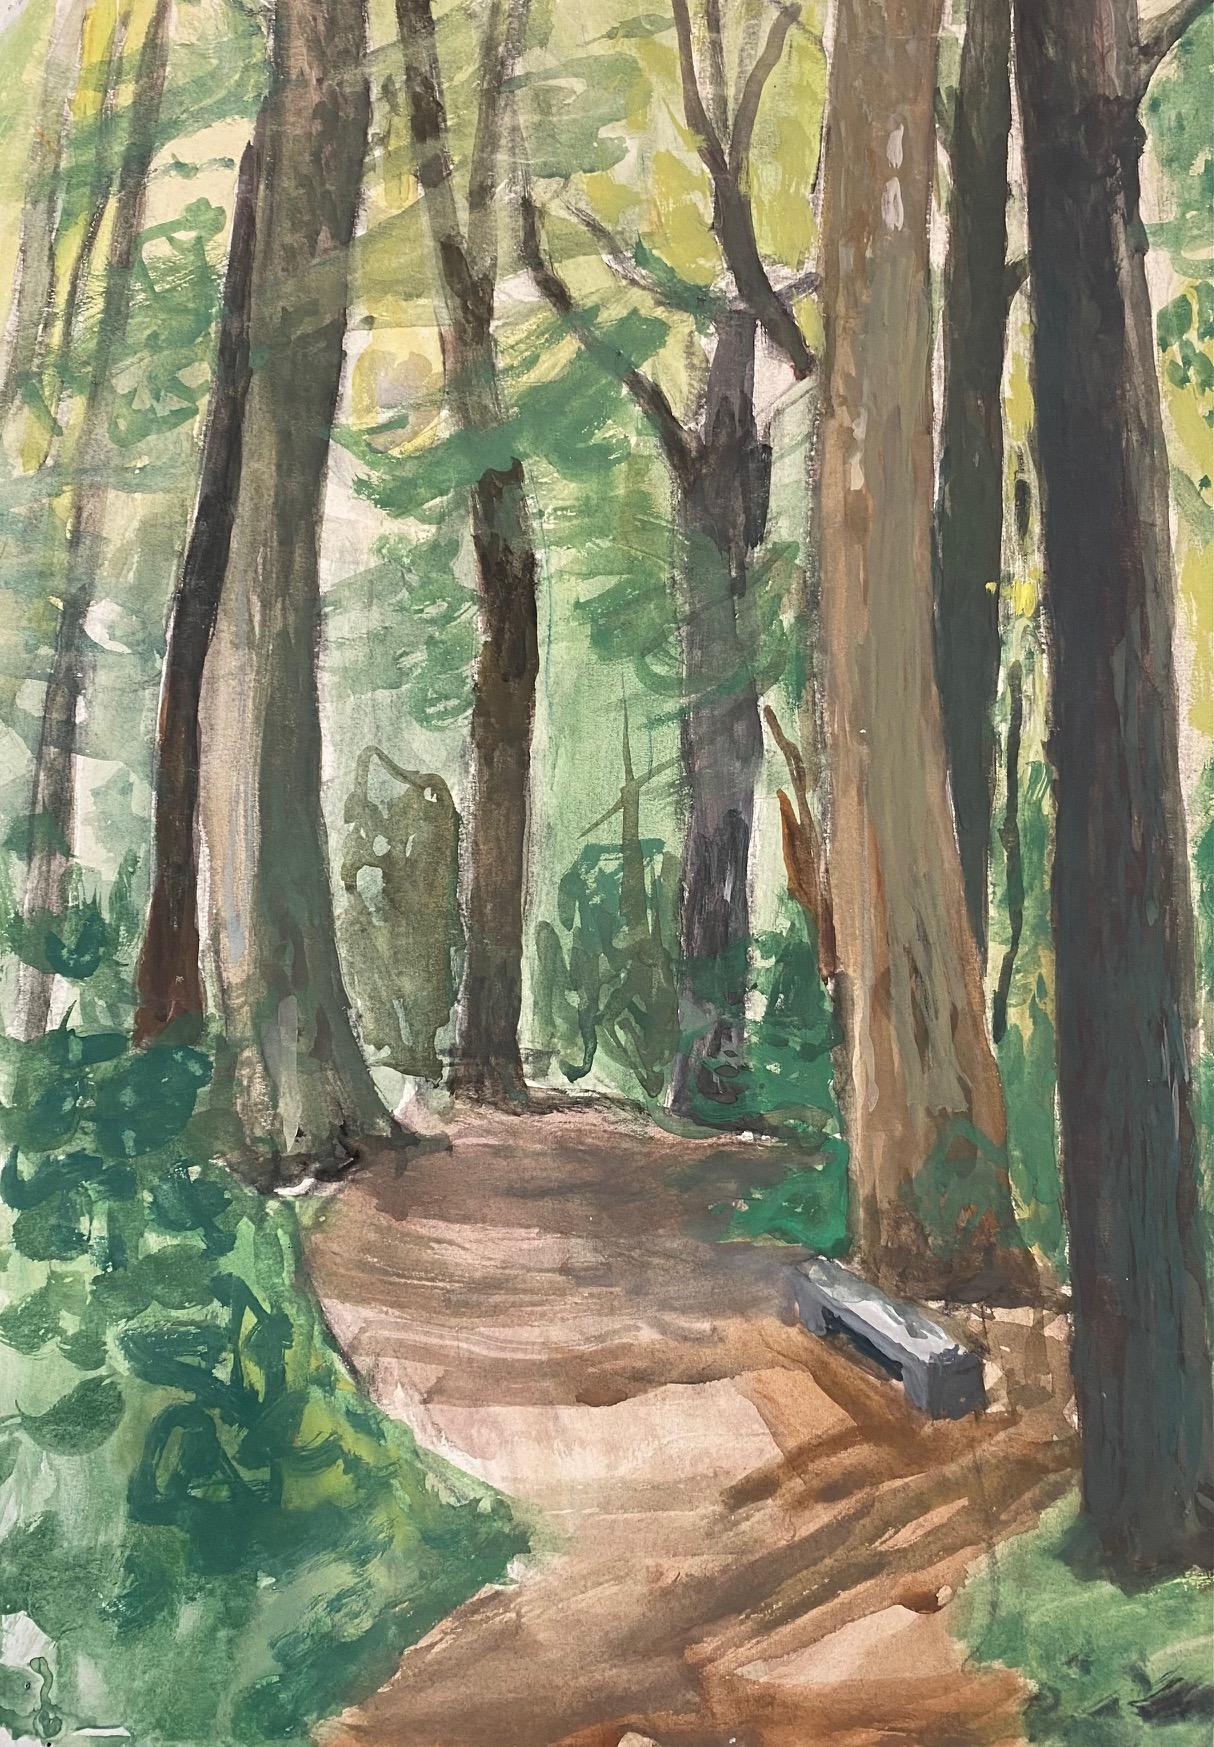 Stone bench under the woods by Charles Goetz - Watercolor 42x30 cm